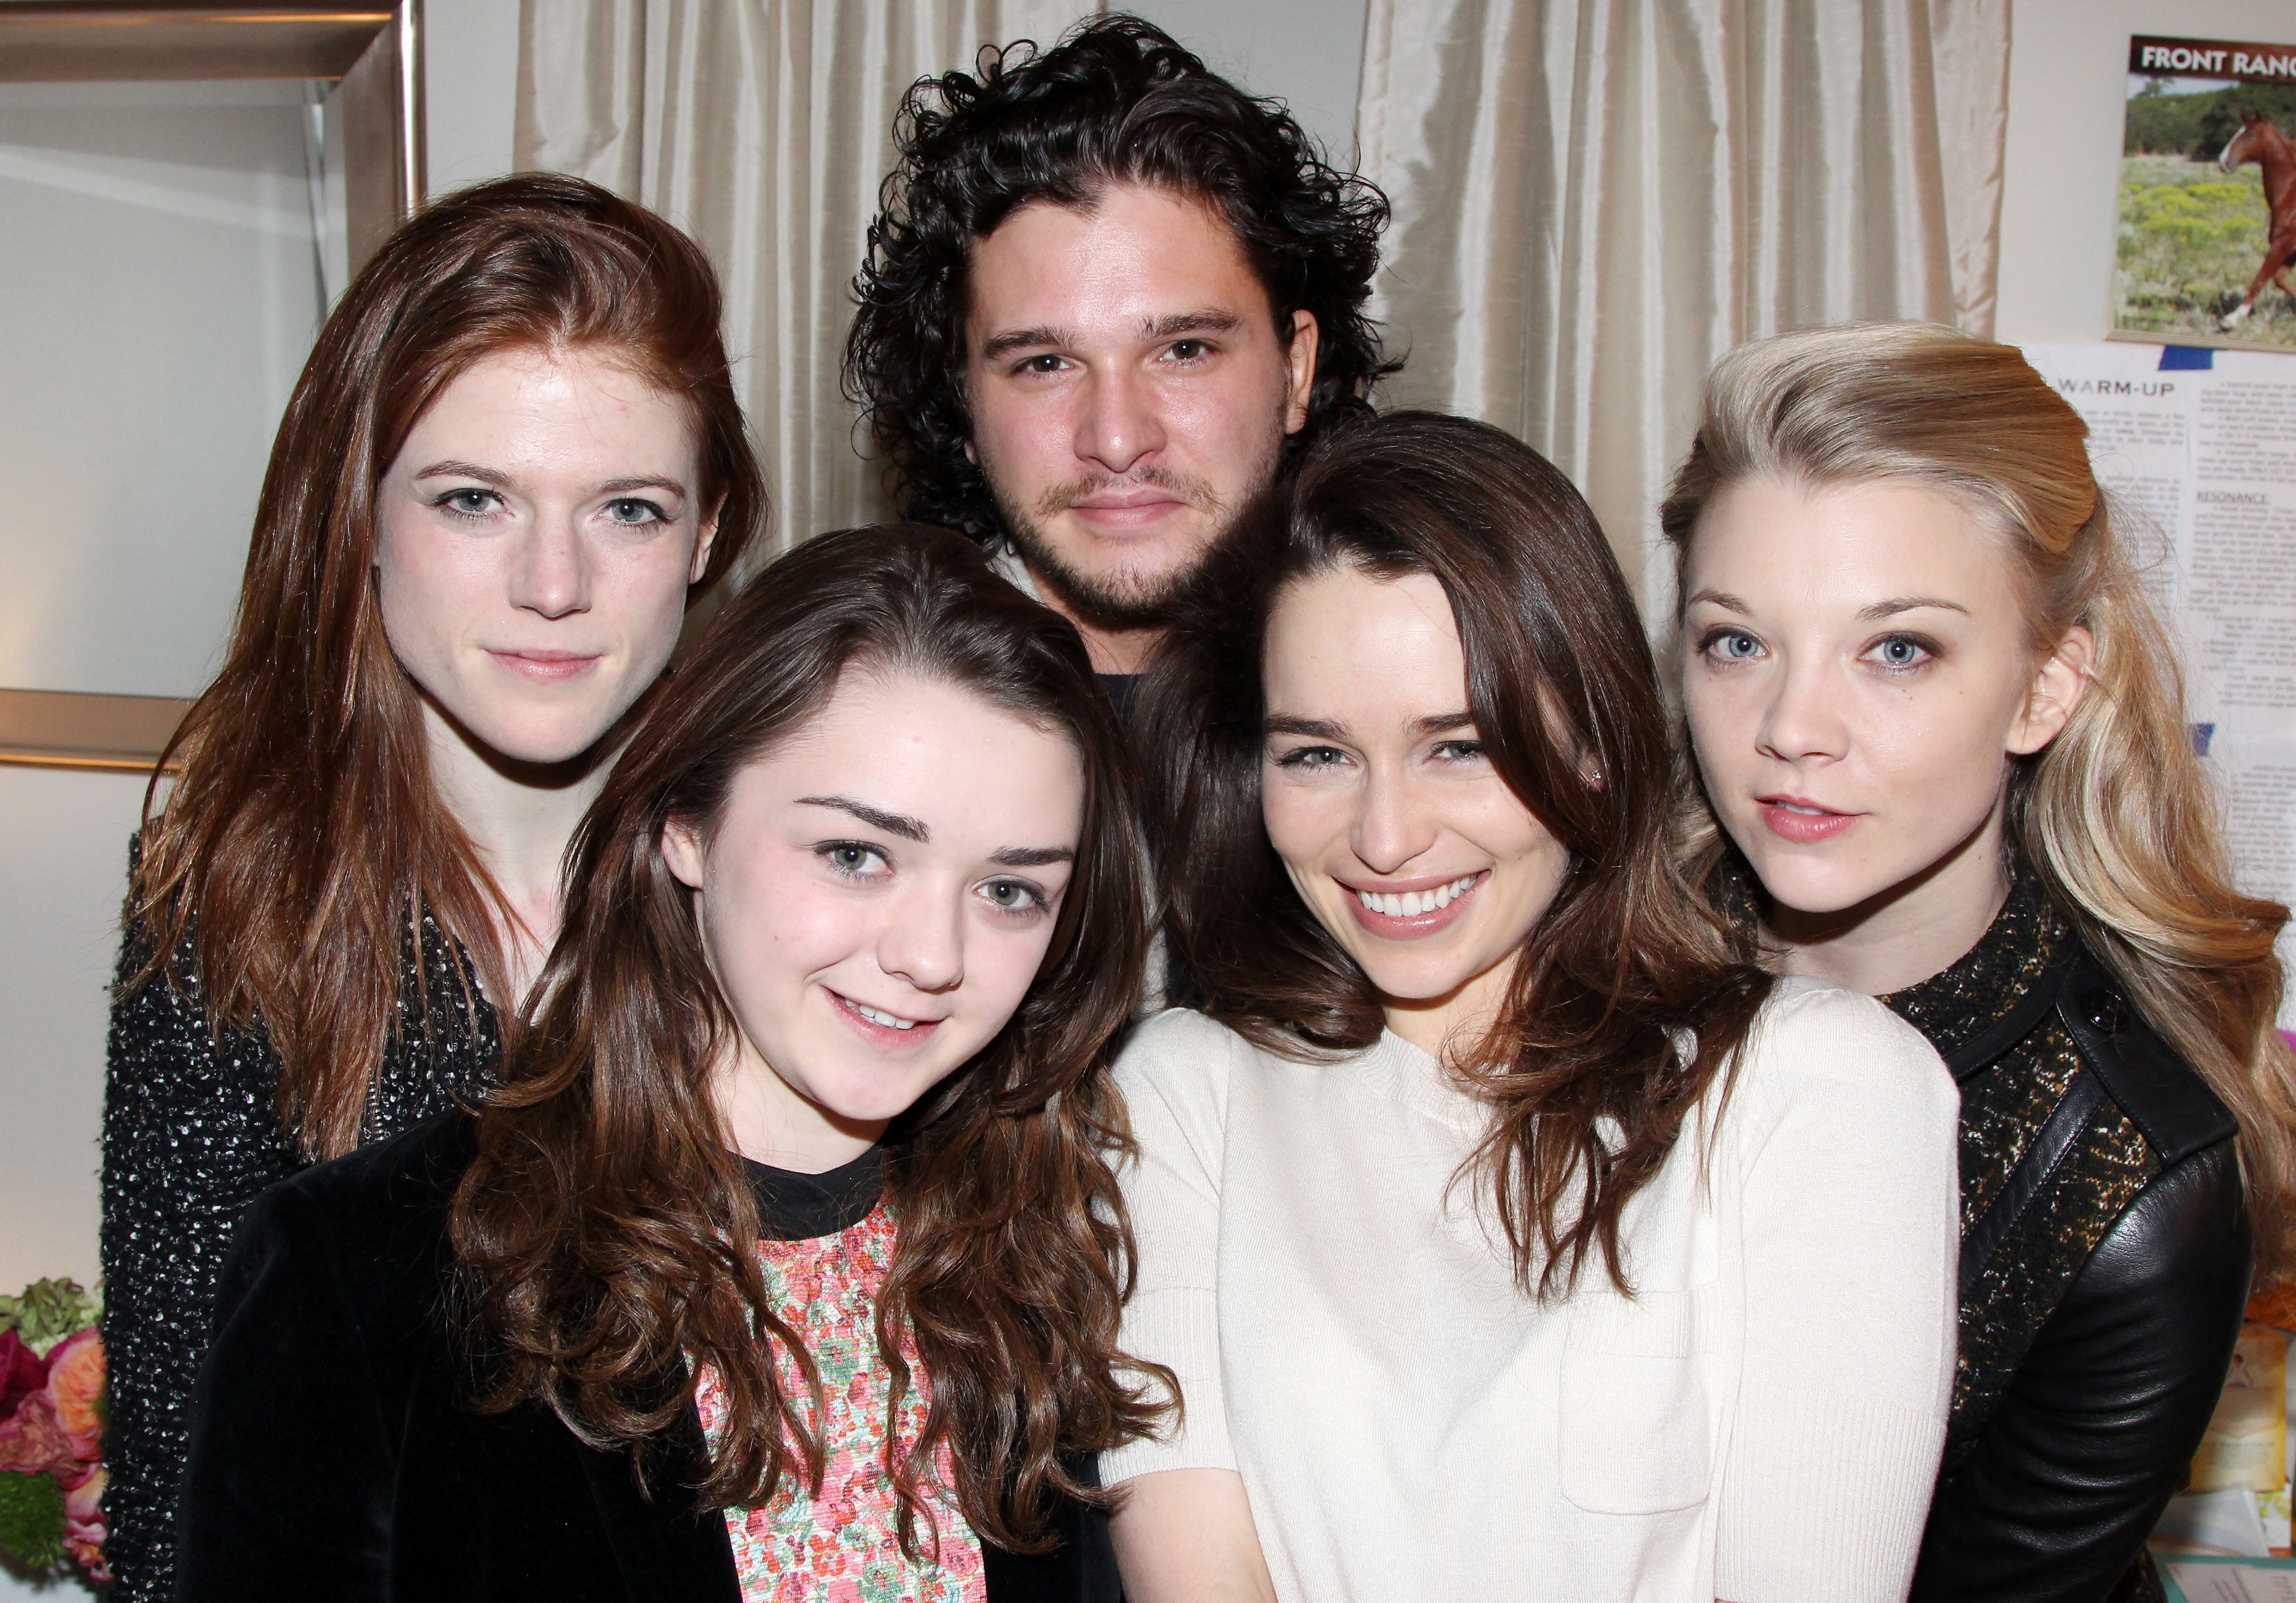 Game of Thrones': What's Next for the Cast?